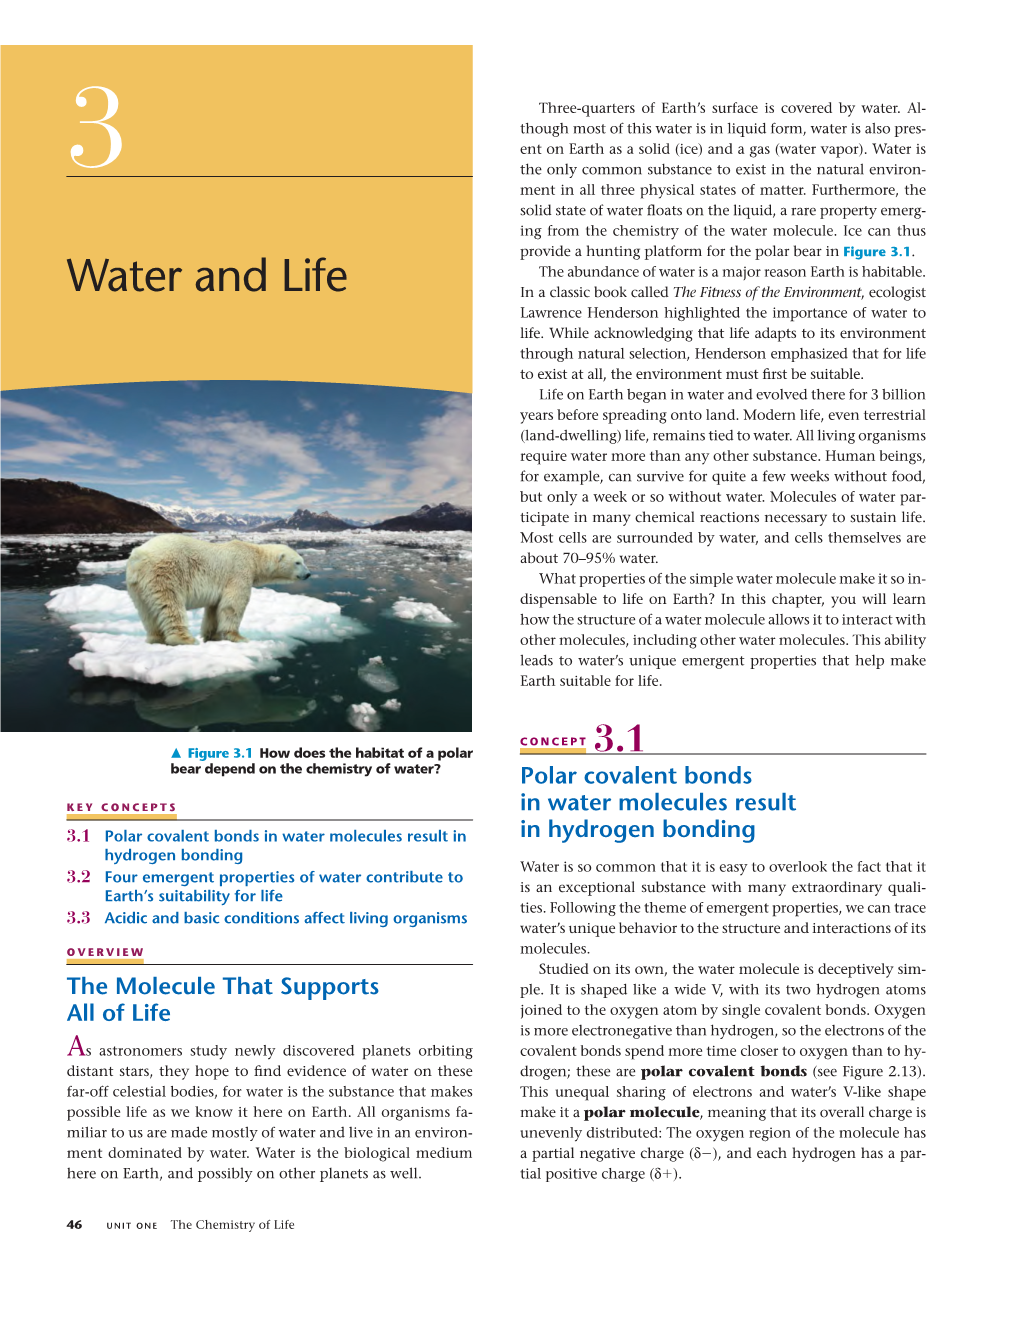 Water and Life in a Classic Book Called the Fitness of the Environment , Ecologist Lawrence Henderson Highlighted the Importance of Water to Life